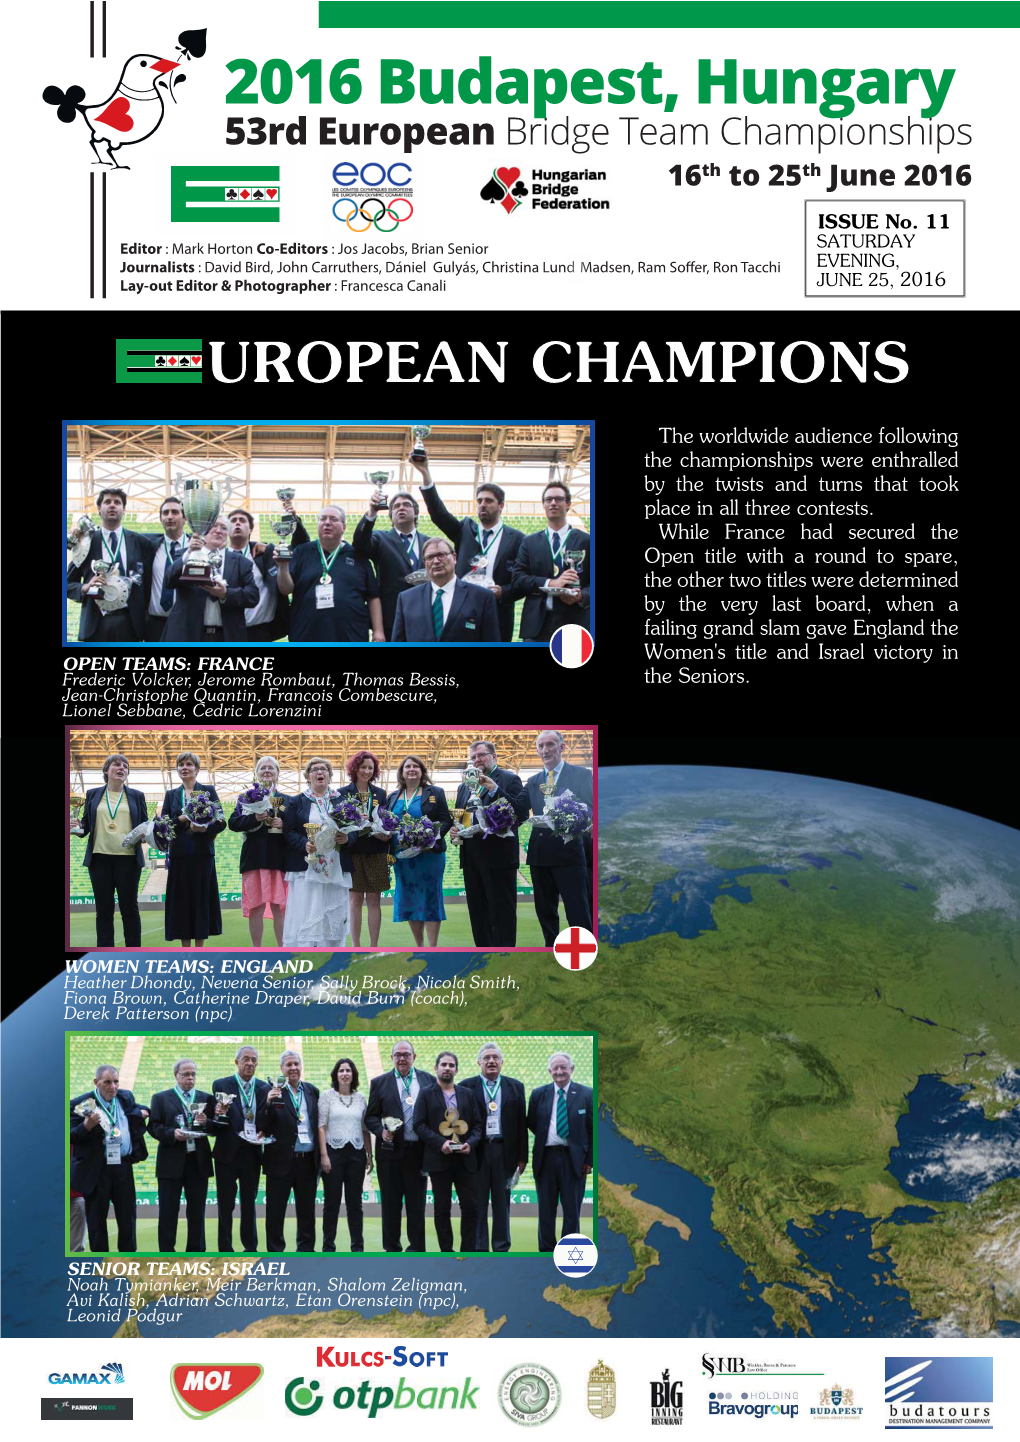 2016 Budapest, Hungary 53Rd European Bridge Team Championships 16Th to 25Th June 2016 ISSUE No